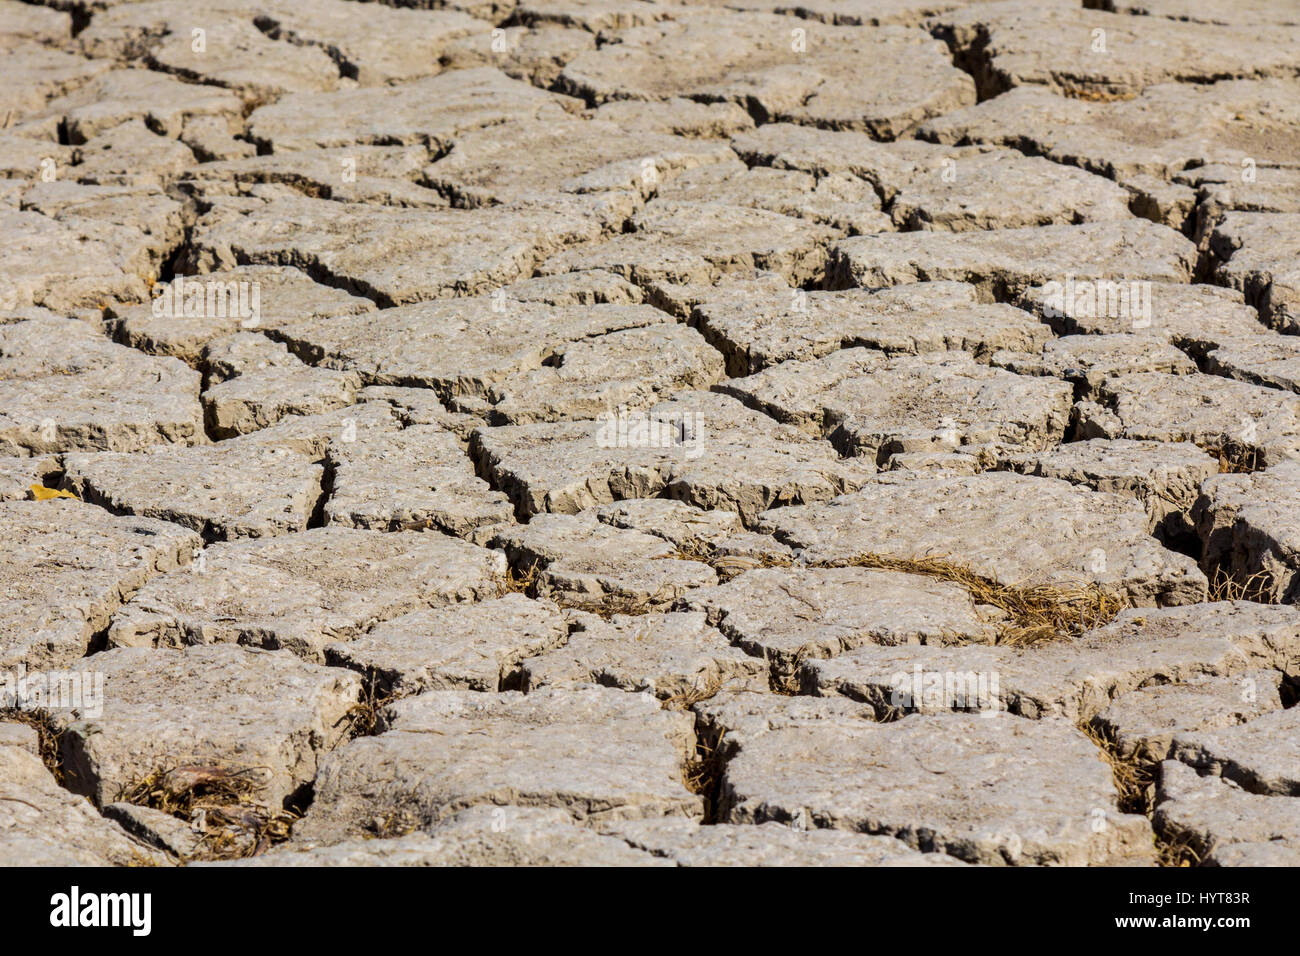 Dry ground on Zayandeh river in Iran during the summer 2016 drought  Picture of crackeled ground caused by an exceptionnaly warm and dry period in sum Stock Photo